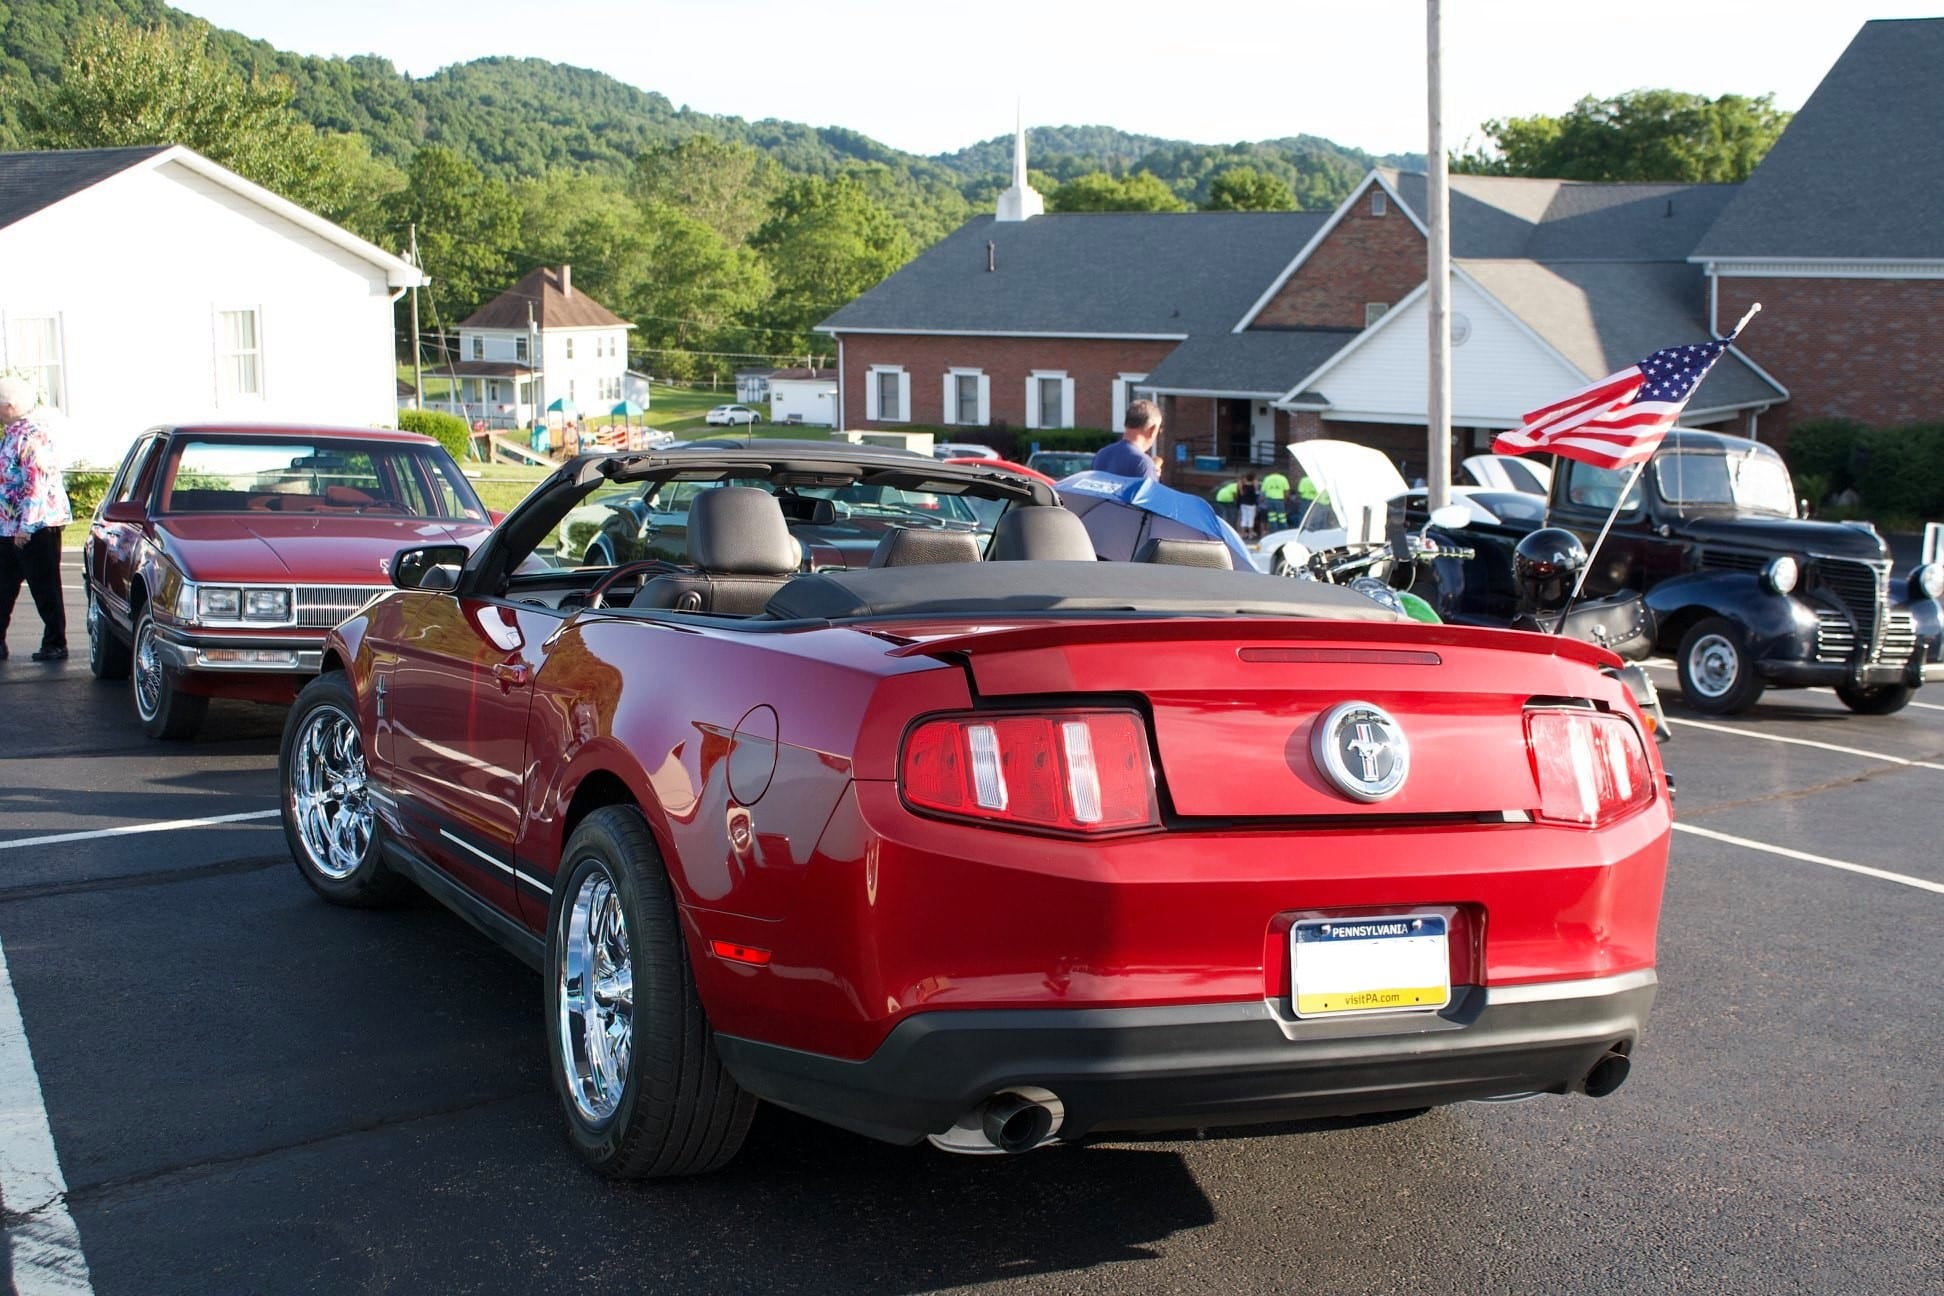 Photograph of red car in parking lot overlooking Mt. Morris.